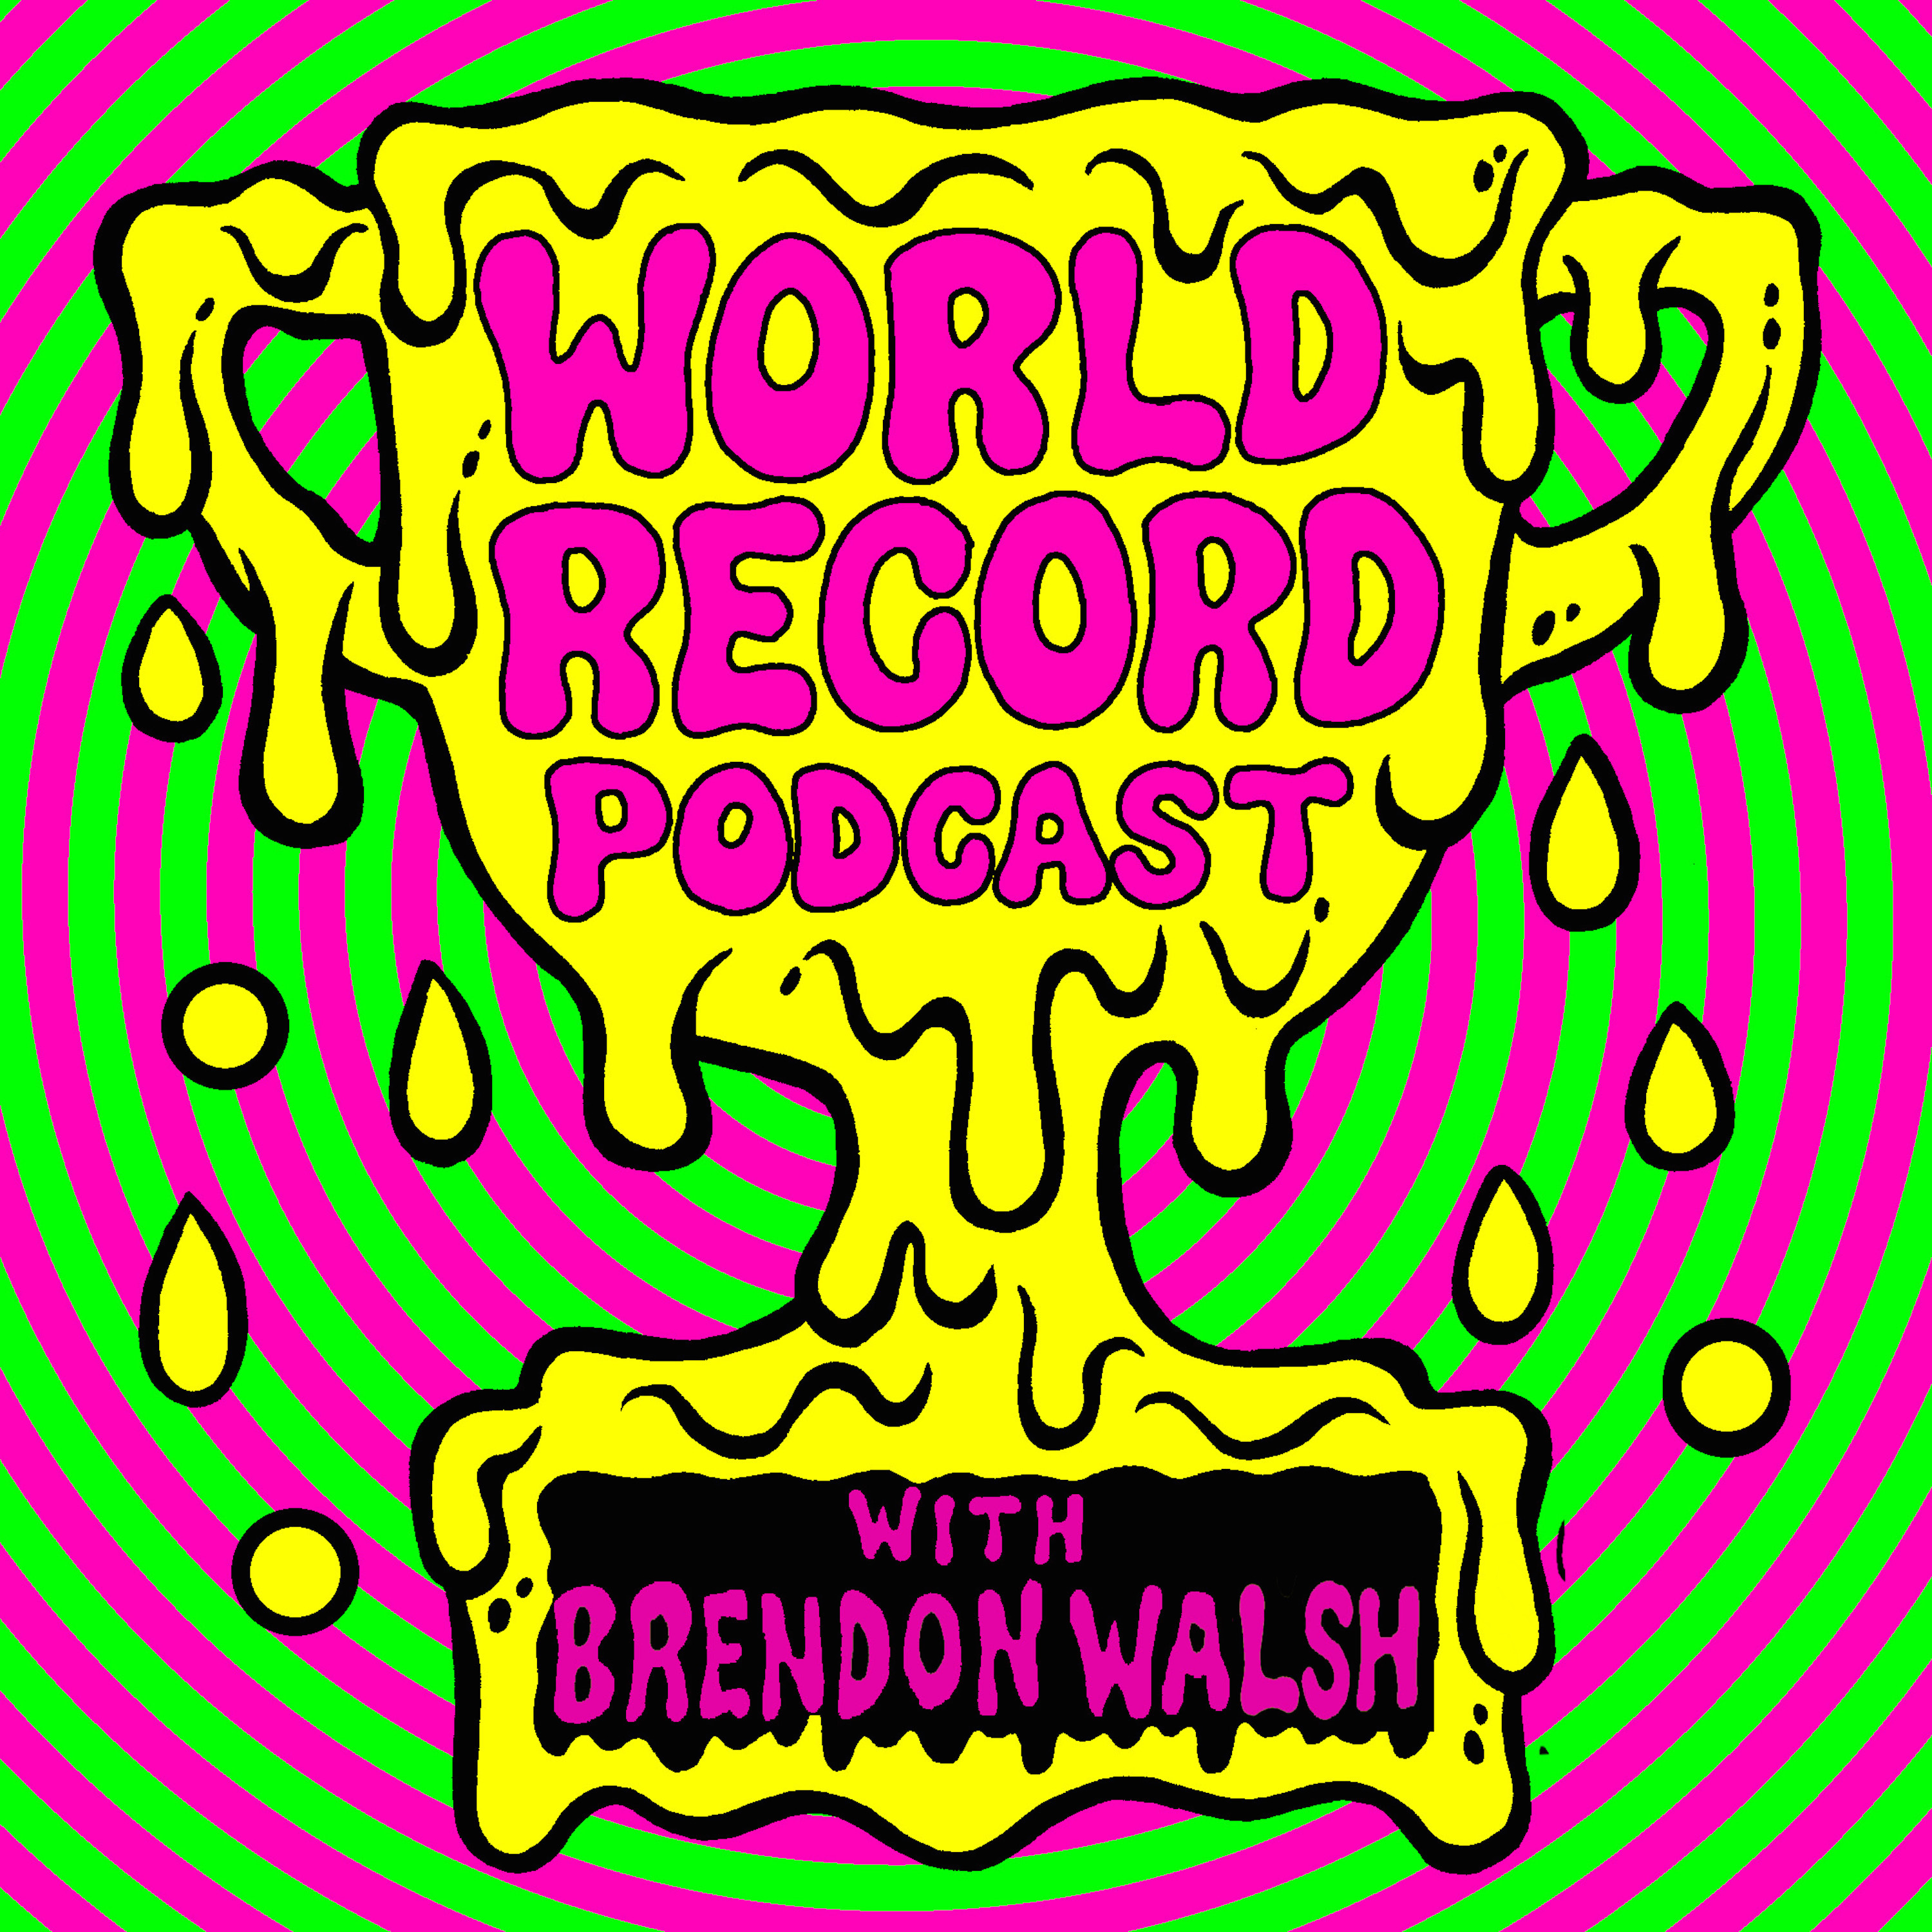 World Record Podcast with Brendon Walsh podcast show image